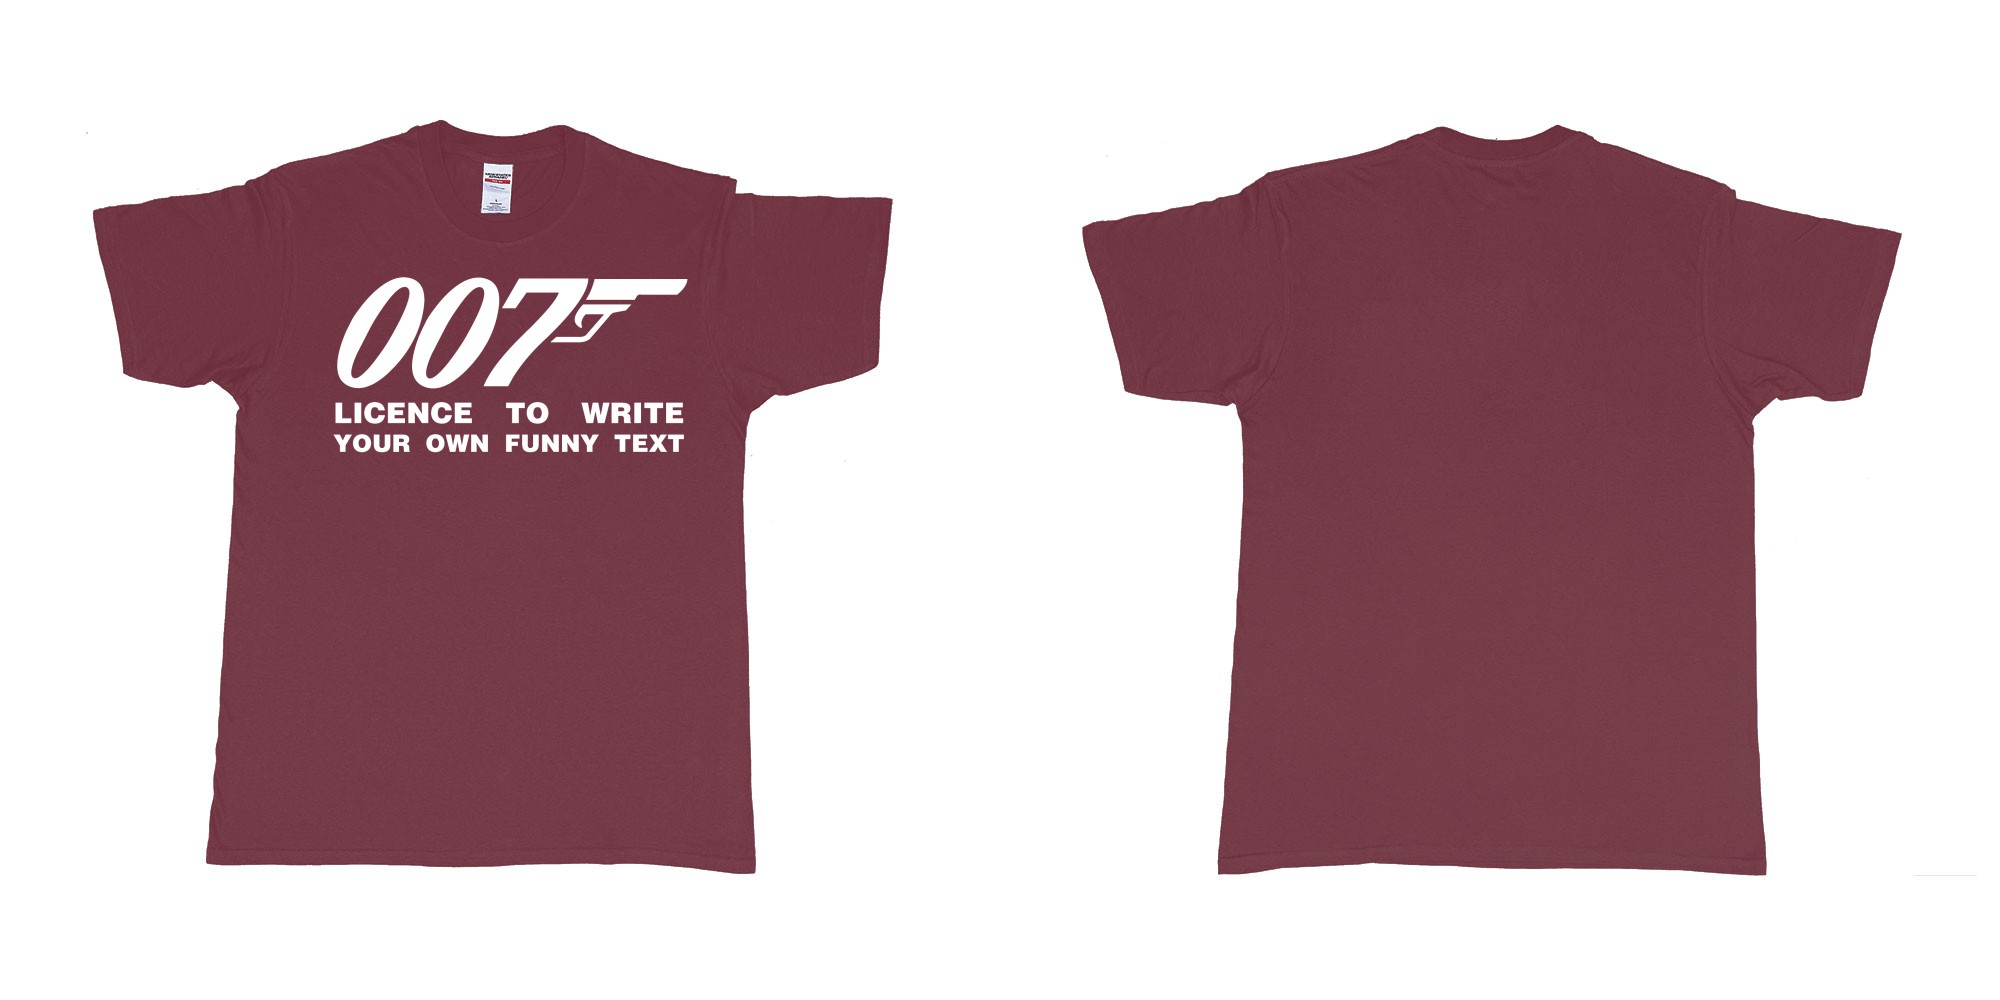 Custom tshirt design james bond logo licence to write own custom text print in fabric color marron choice your own text made in Bali by The Pirate Way